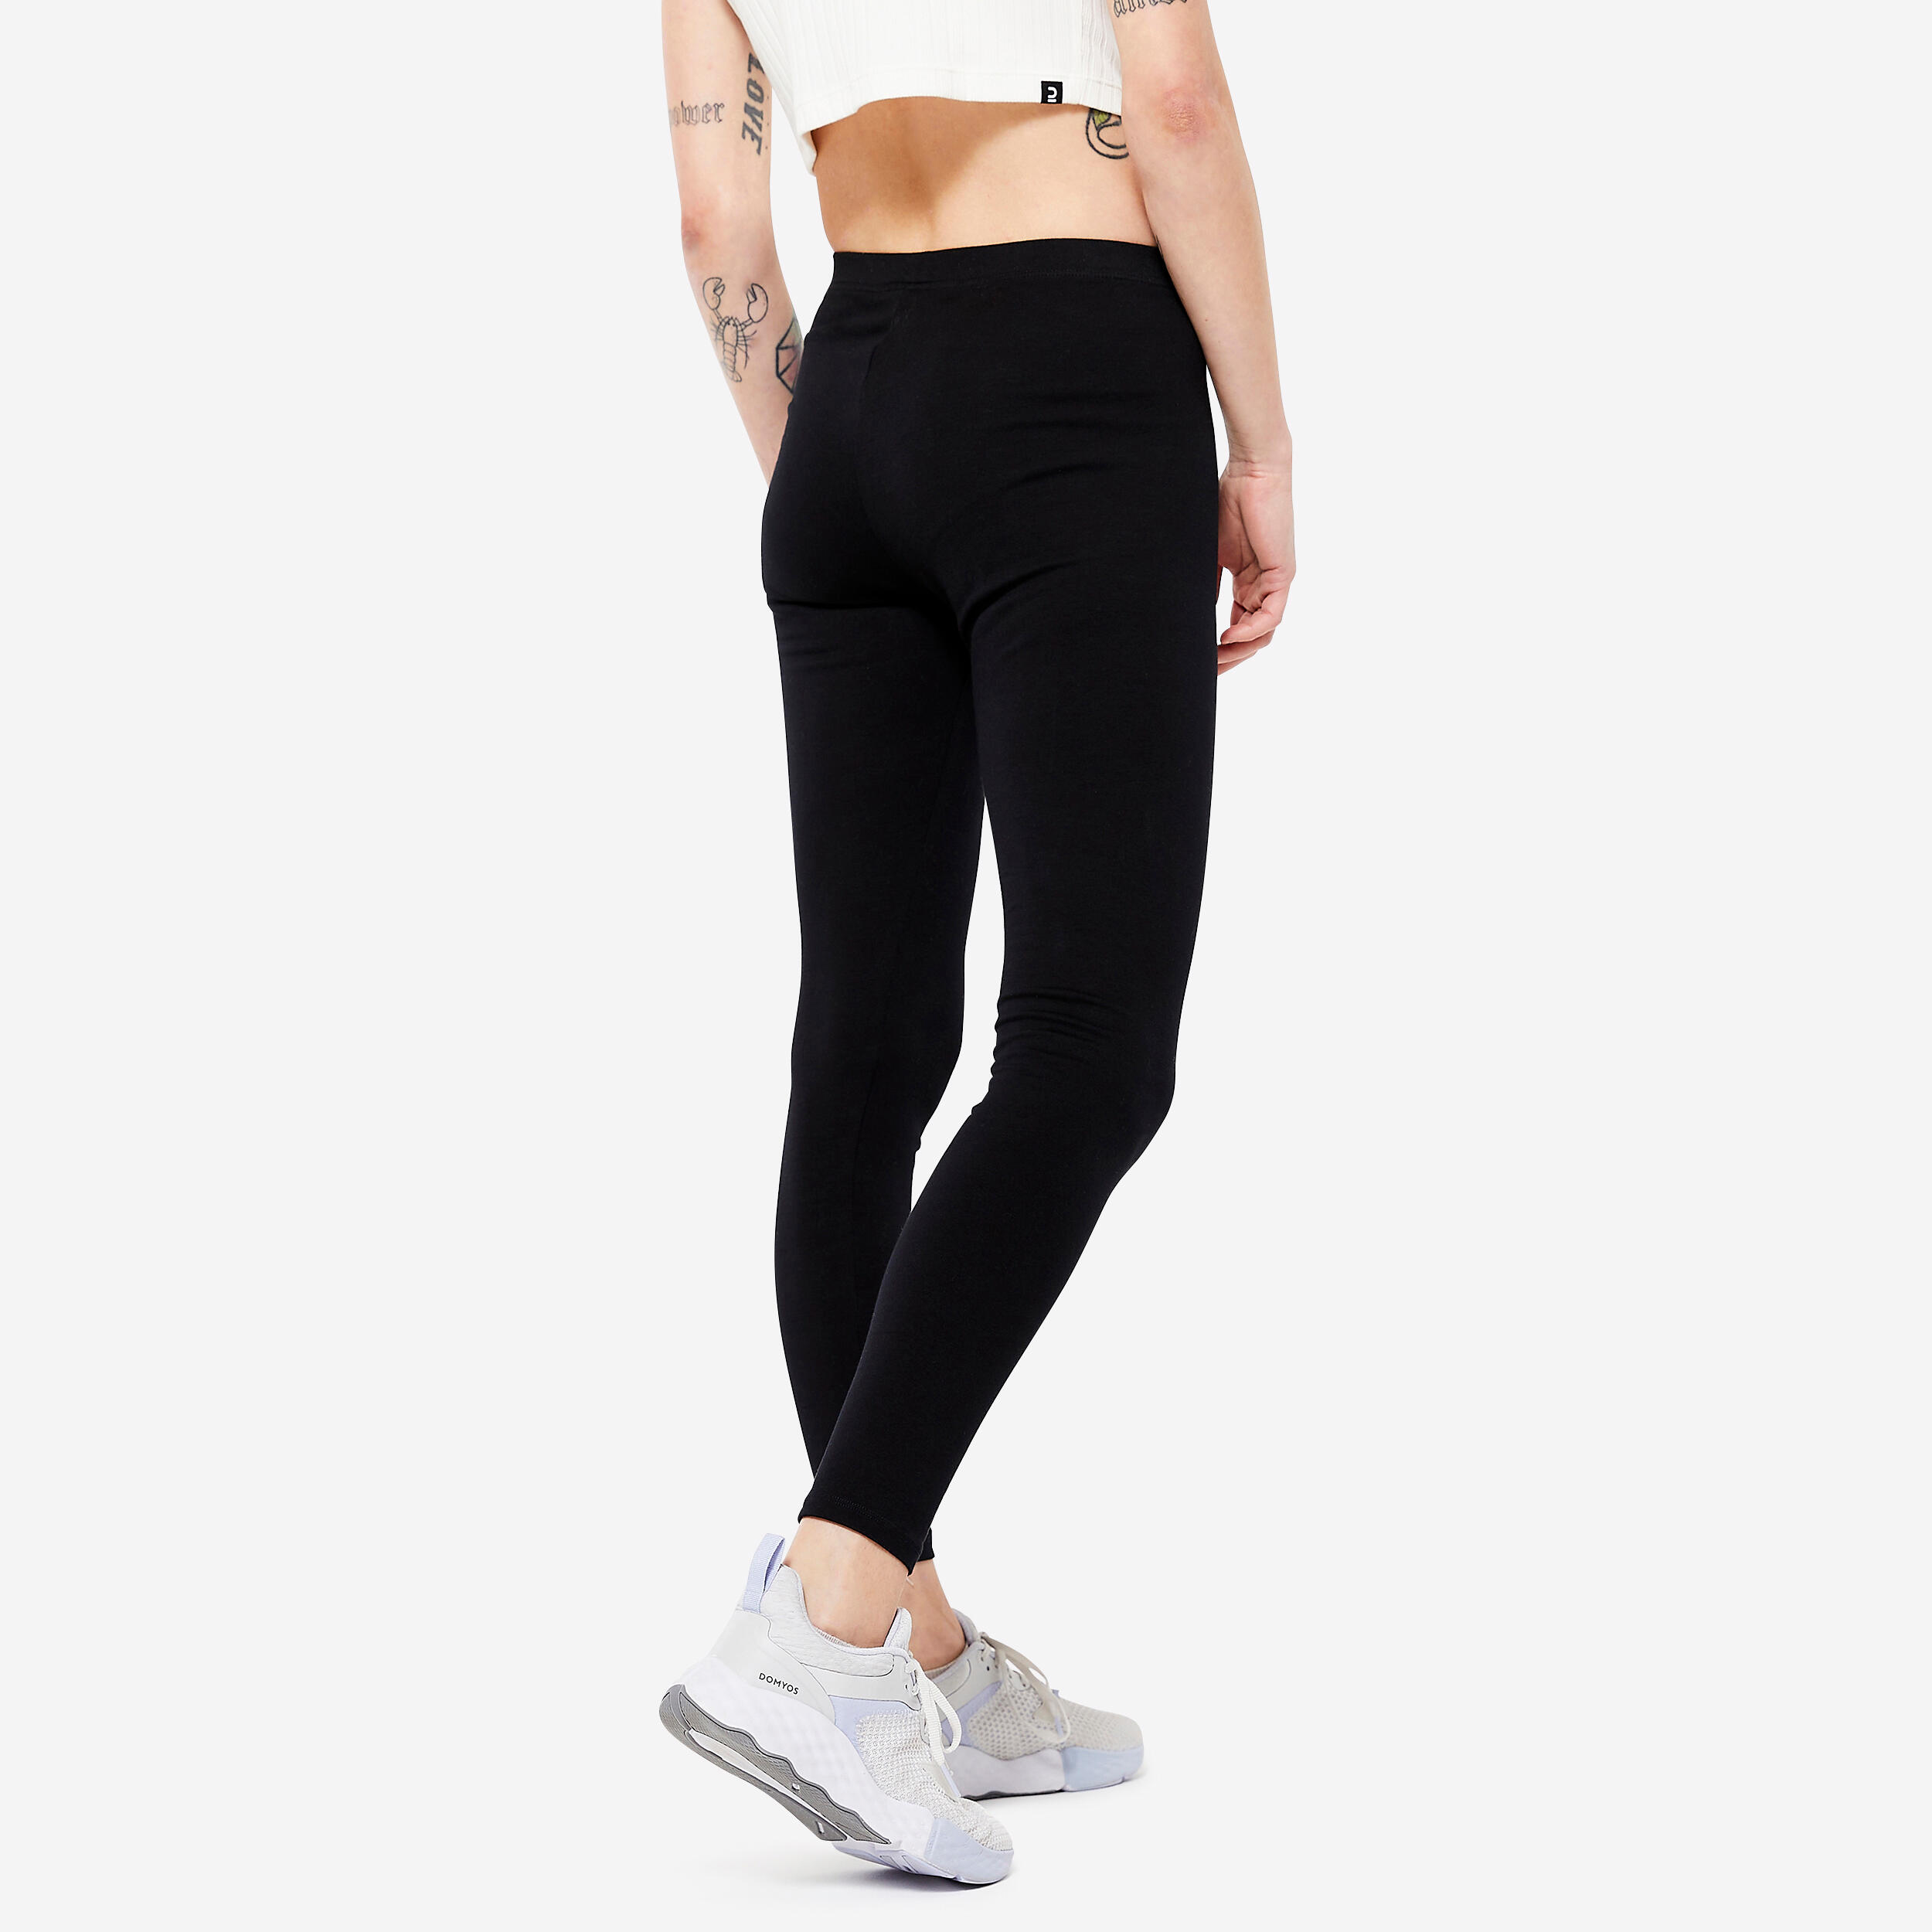 Decathlon high quality black yoga workout gym pants trousers with